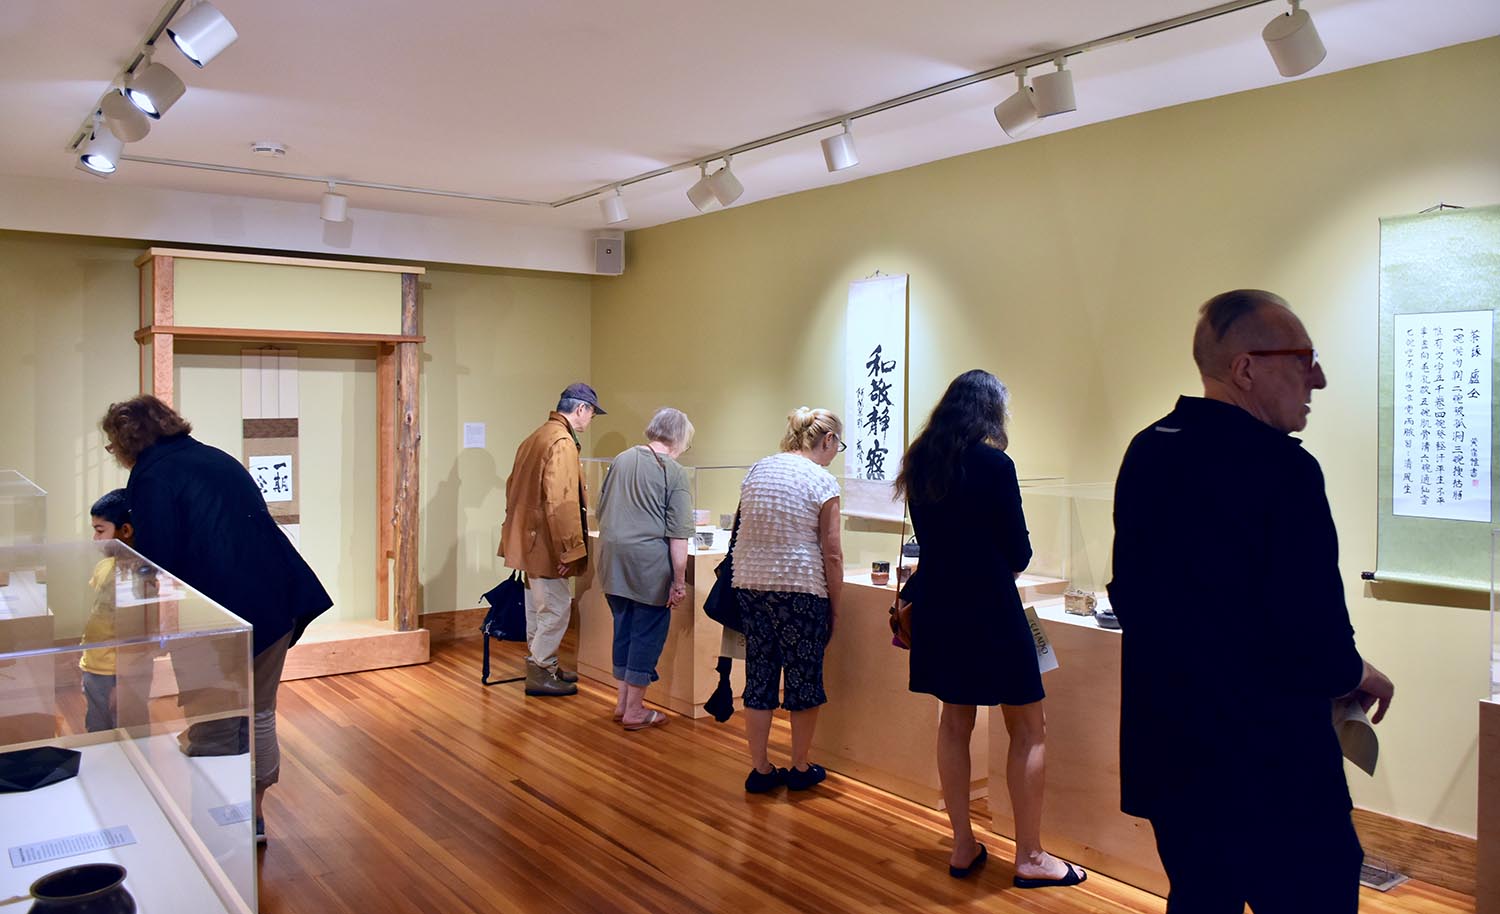 The exhibition Chado: The Way of Tea opened in the College of East Asian Studies Gallery at Mansfield Freeman Center on Sept. 12. The exhibit explores the prominent role and significance of the tea ceremony as an art and spiritual practice in China and Japan.